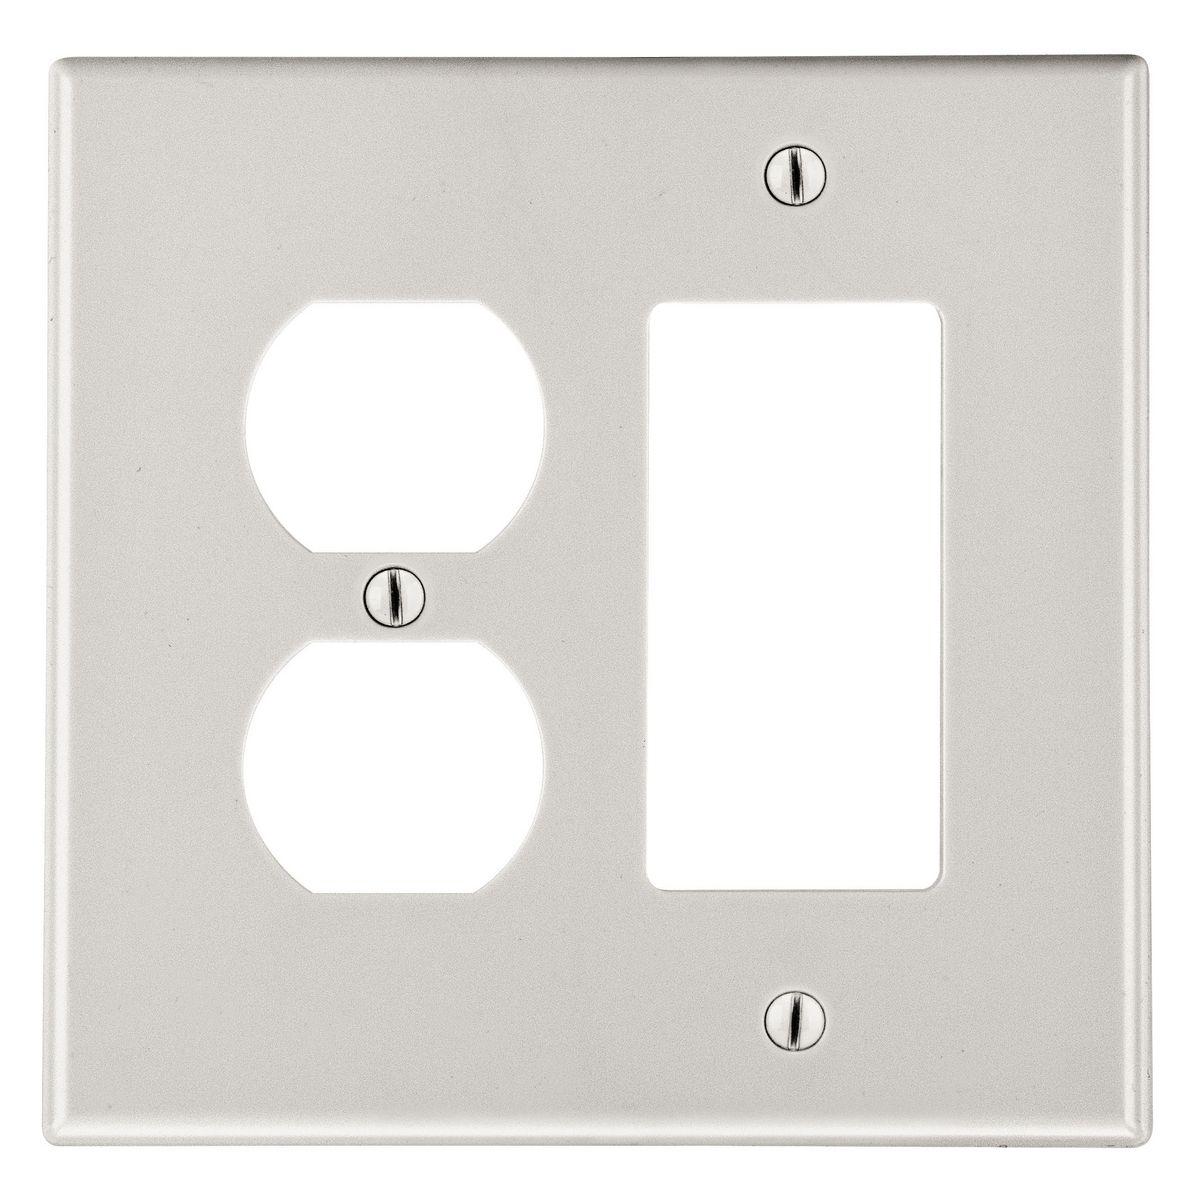 Hubbell PJ826LA Wallplate, Mid-Size 2-Gang, 1) Duplex 1) Decorator, Light Almond  ; High-impact, self-extinguishing polycarbonate material ; More Rigid ; Sharp lines and less dimpling ; Smooth satin finish ; Blends into wall with an optimum finish ; Smooth Satin Finish